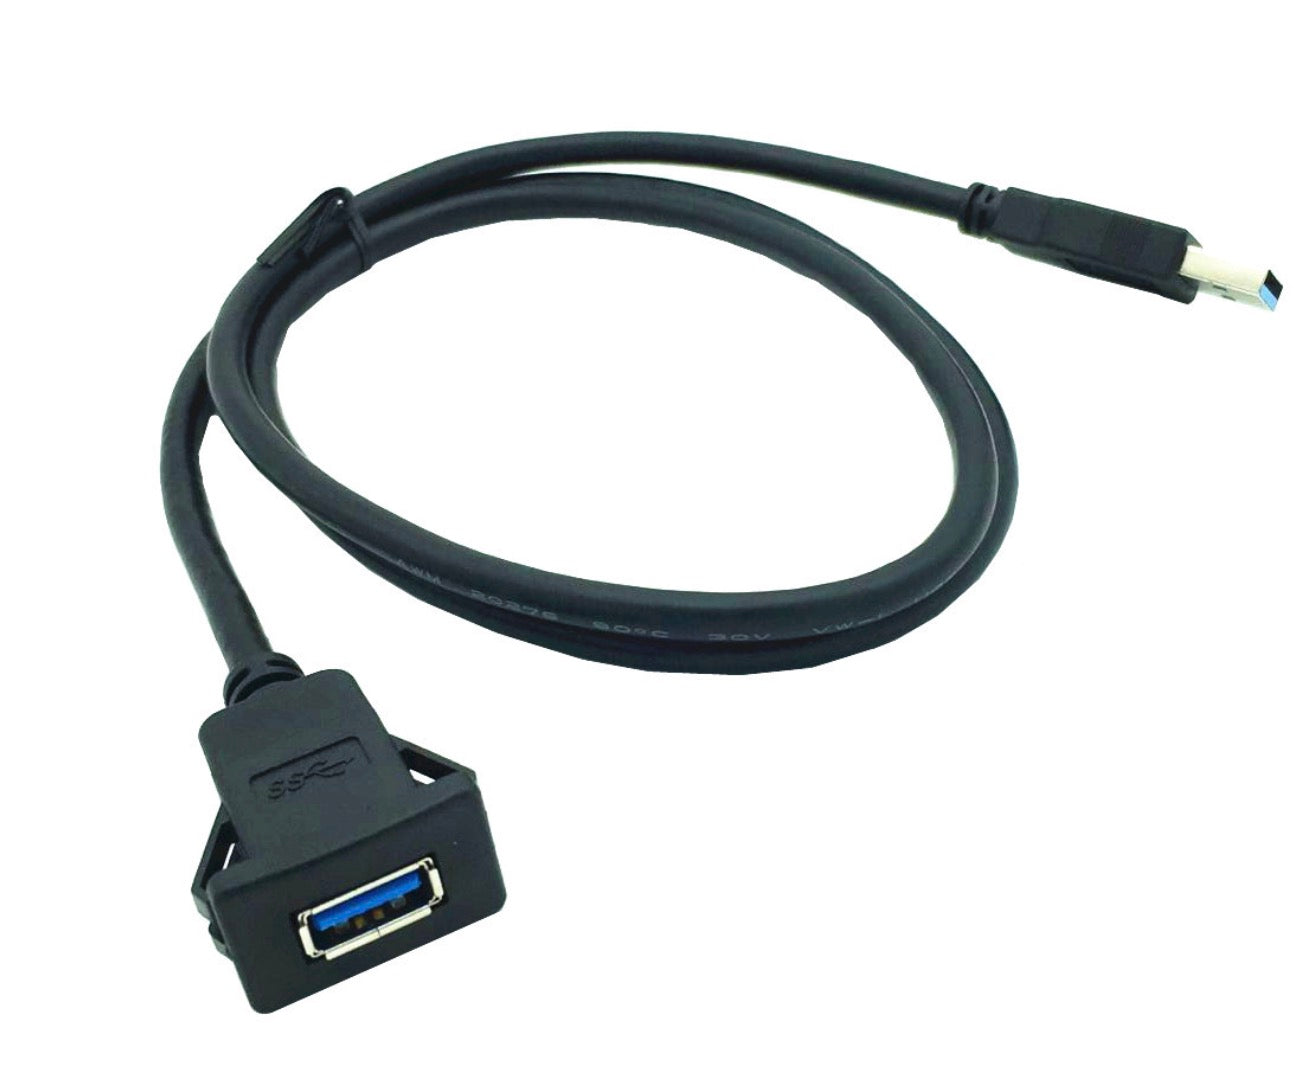 USB 3.0 Type A Male to Female Dash Mount Cable